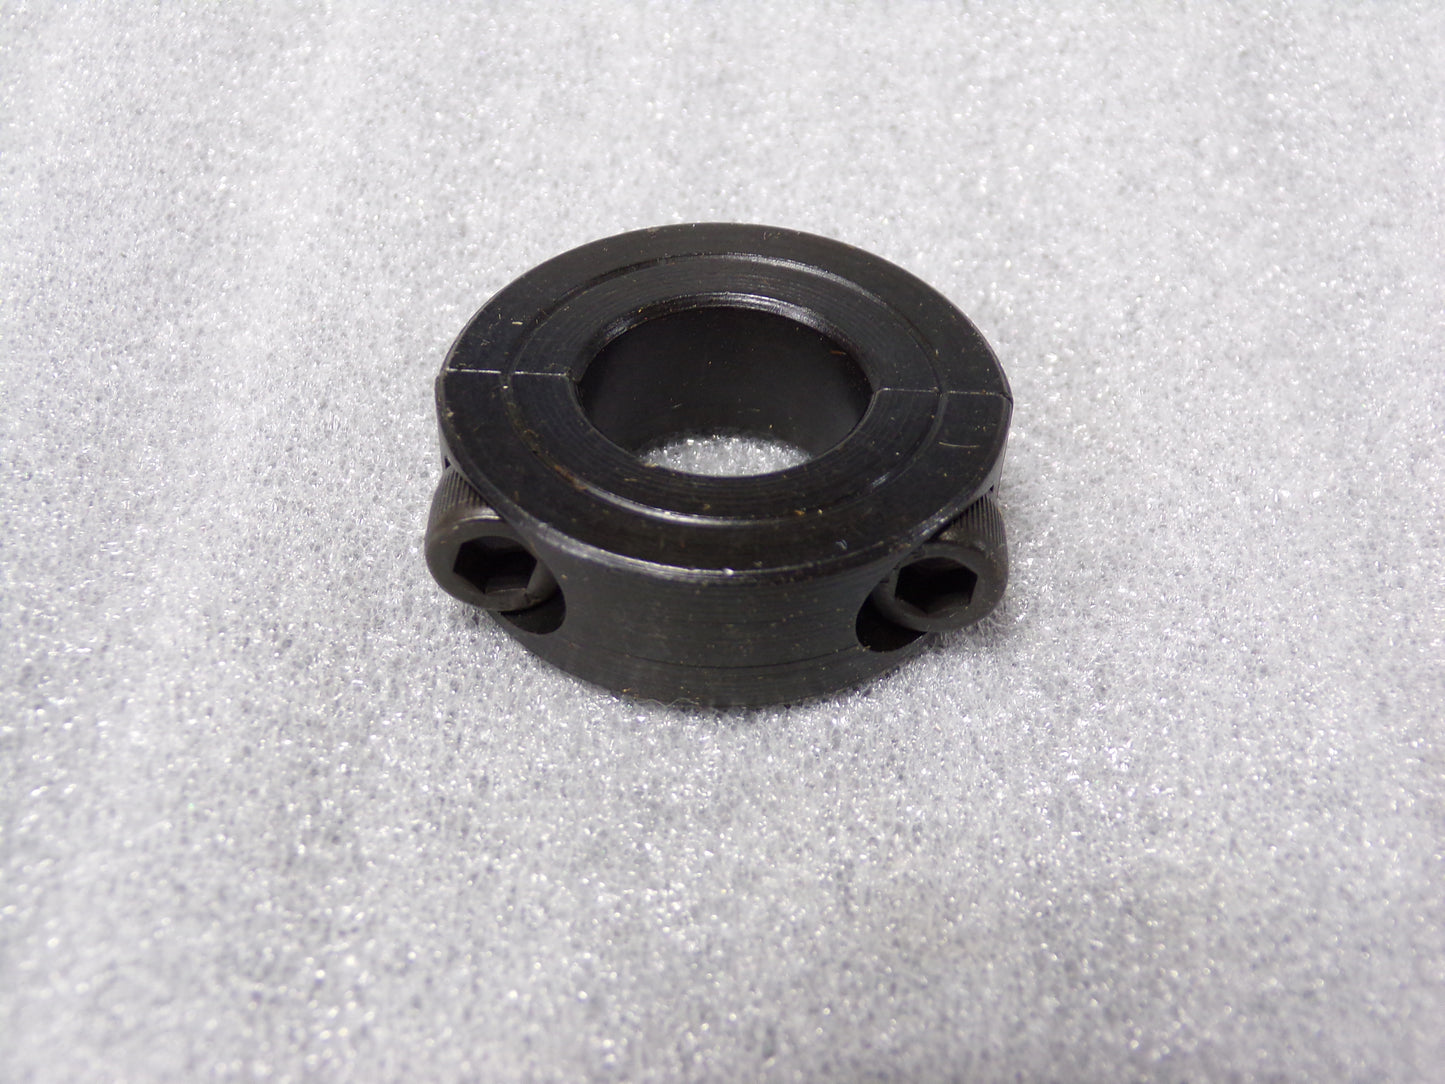 CLIMAX METAL PRODUCTS Black Oxide Steel Shaft Collar, Clamp Collar Style, Standard Dimension Type, 3/4 in Bore Dia. (CR00178-BT26)